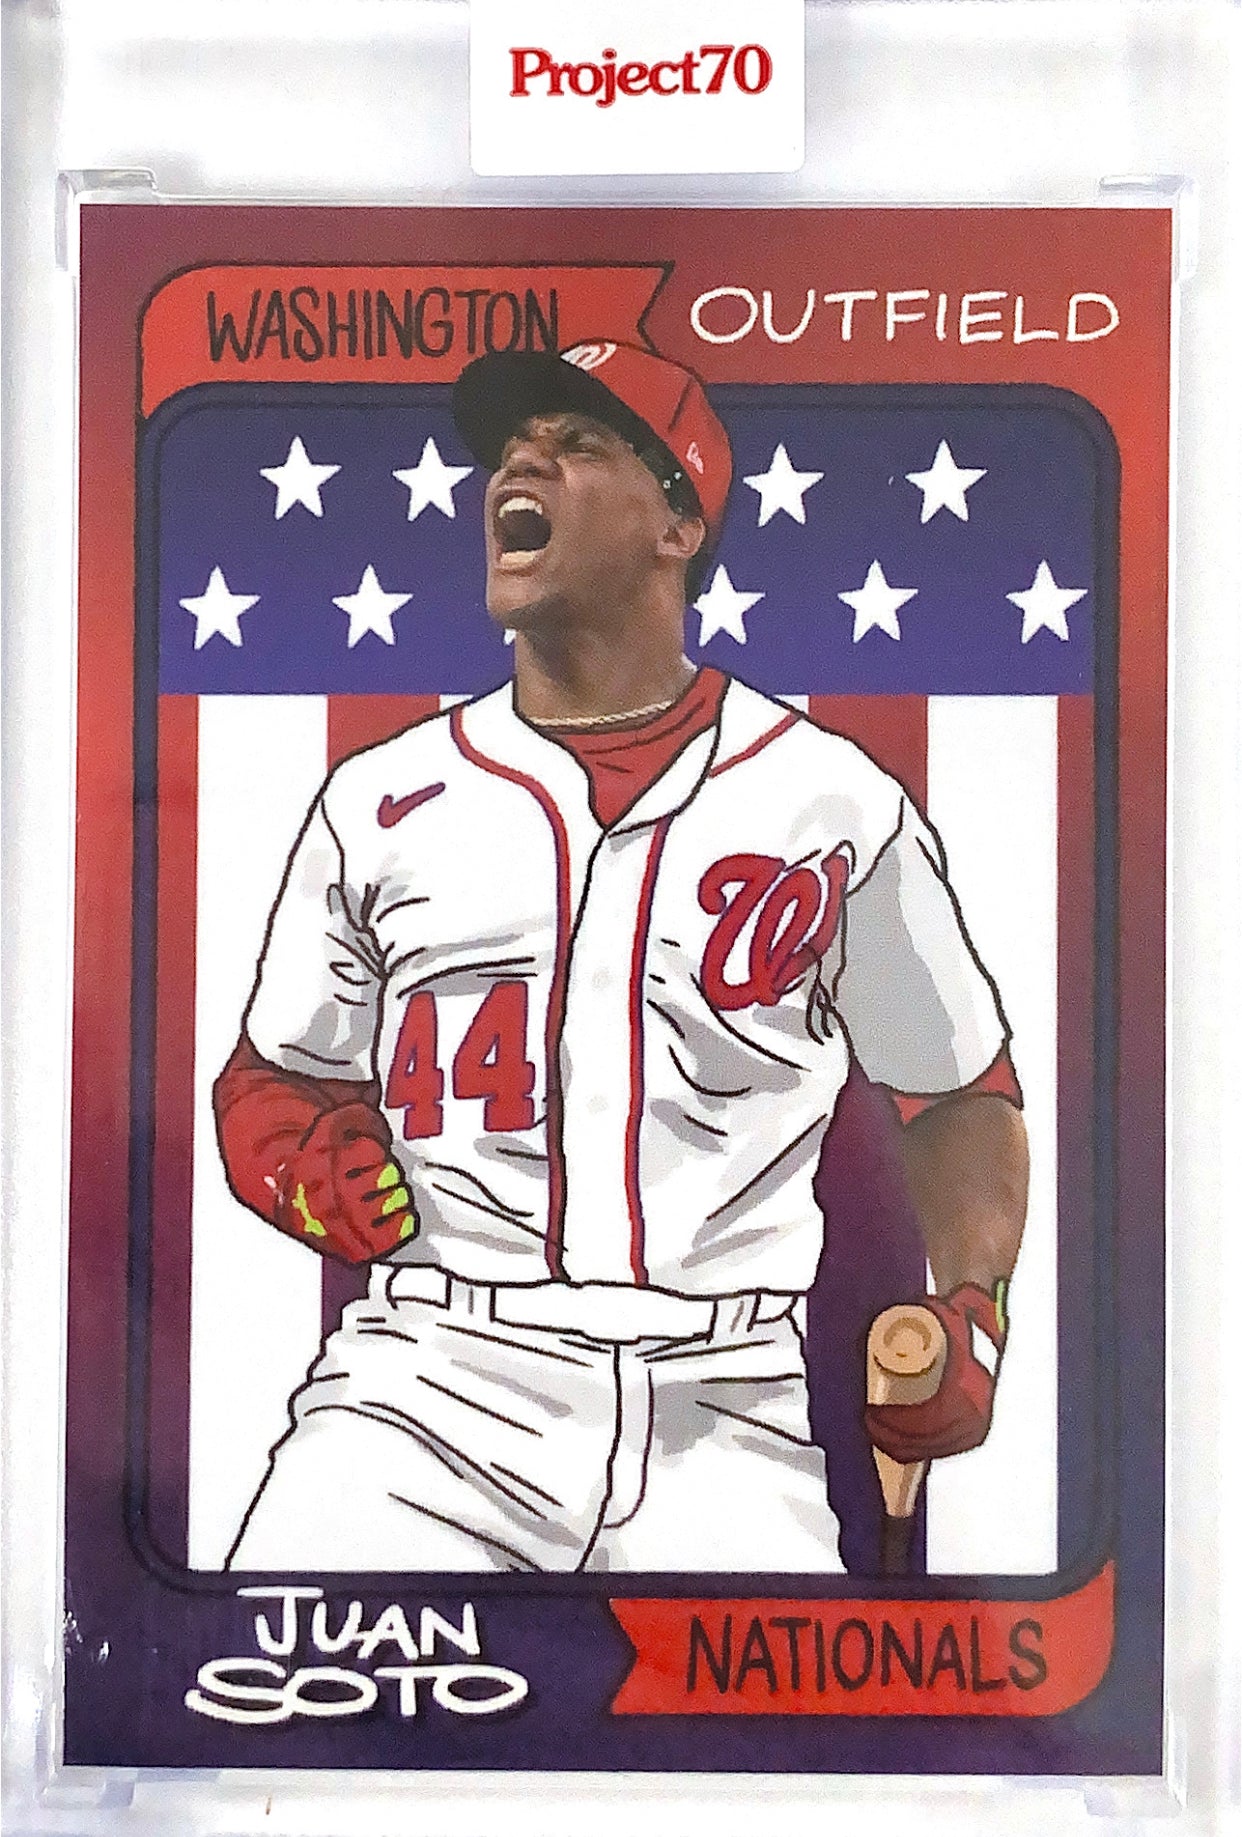 Topps Project 70 - 1974 Juan Soto by Sophia Chang